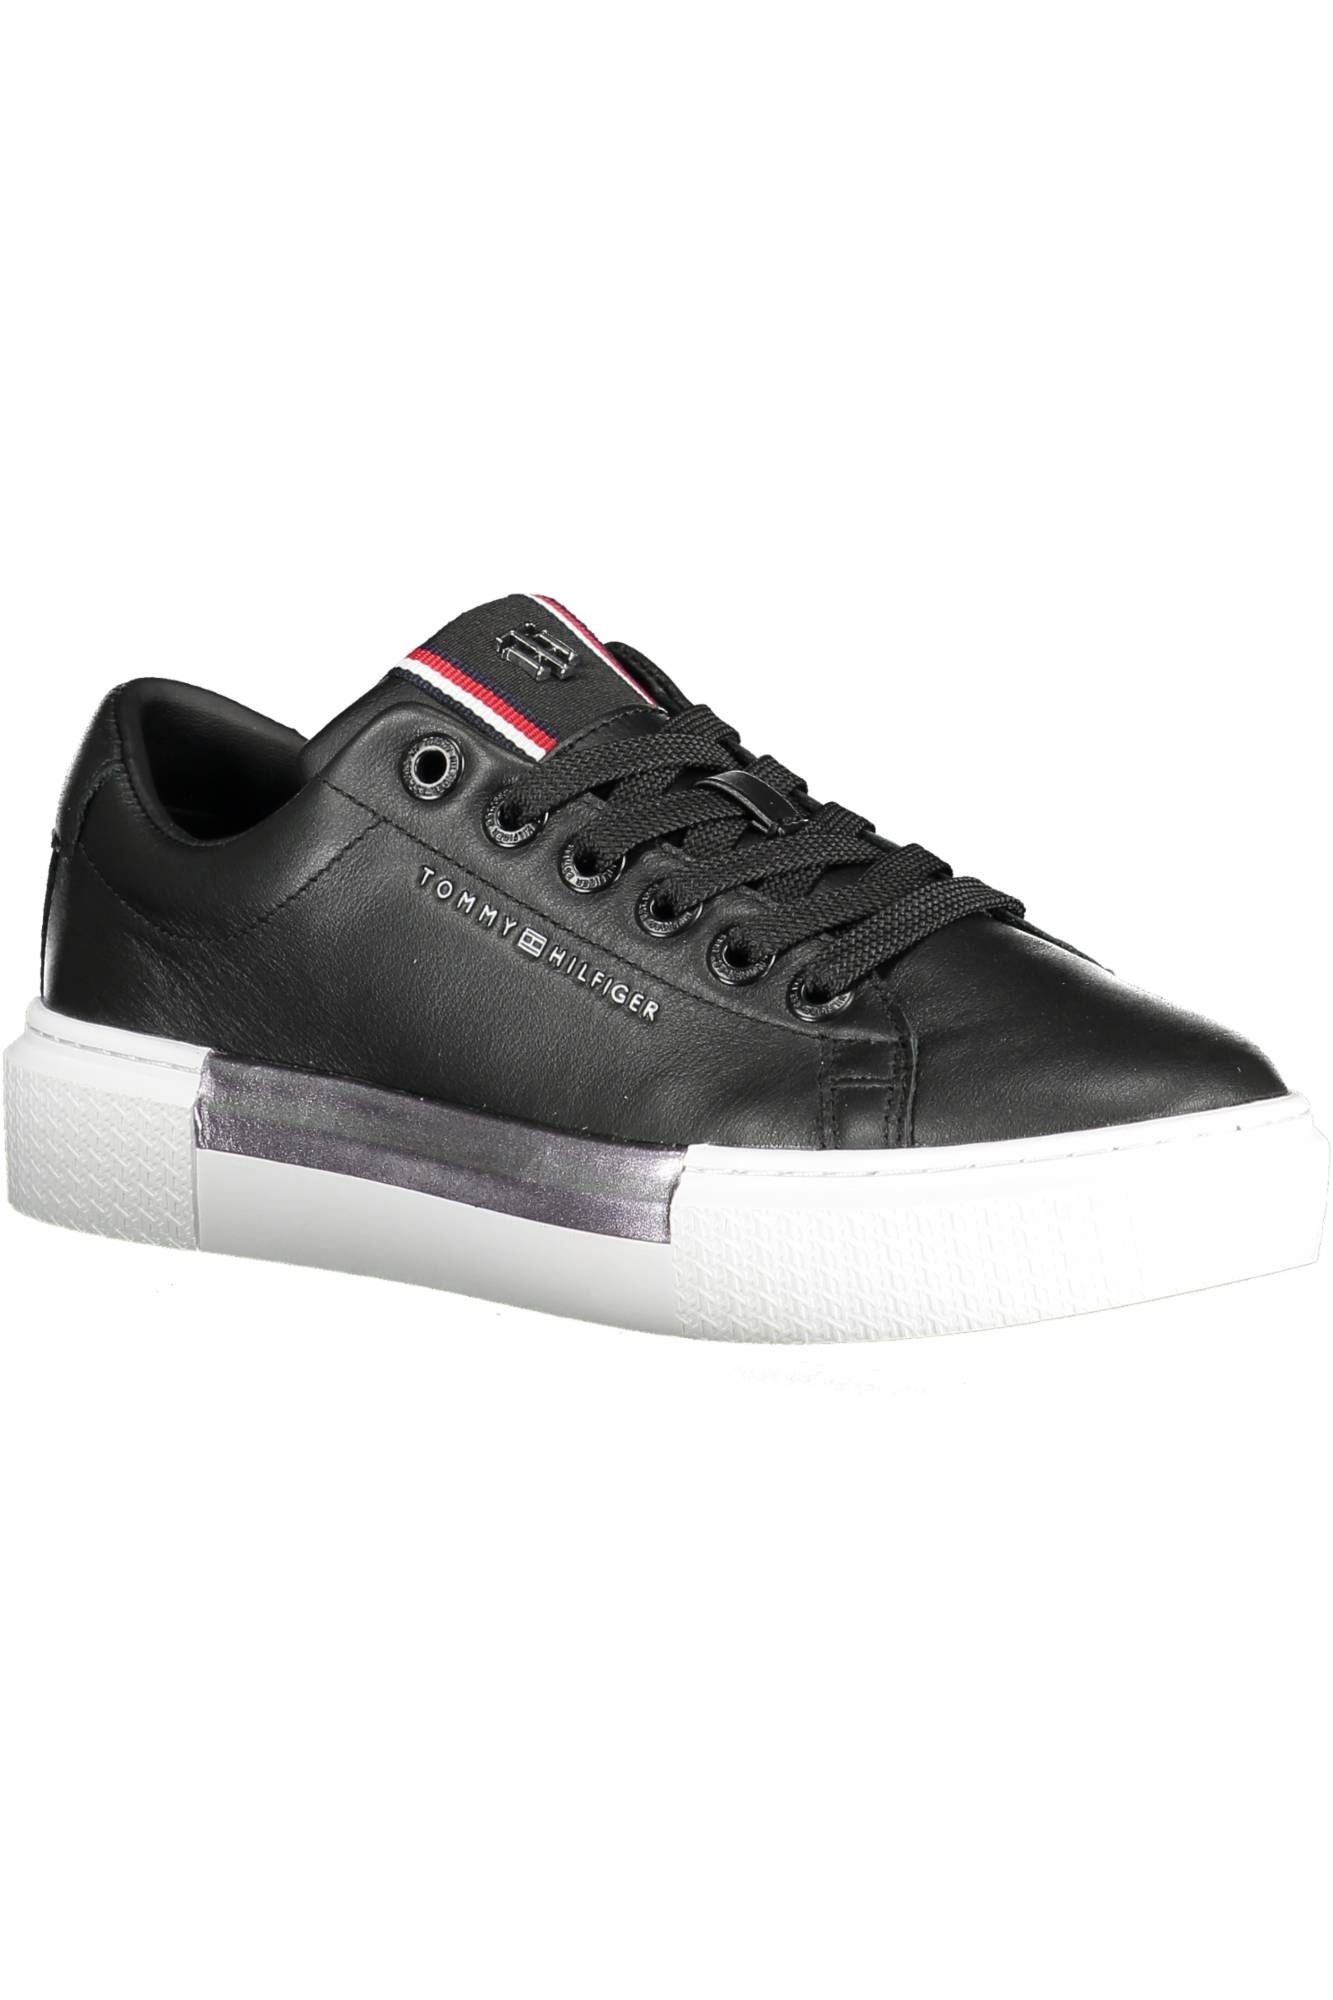 Chic Black Cotton-Leather Blend Sneakers